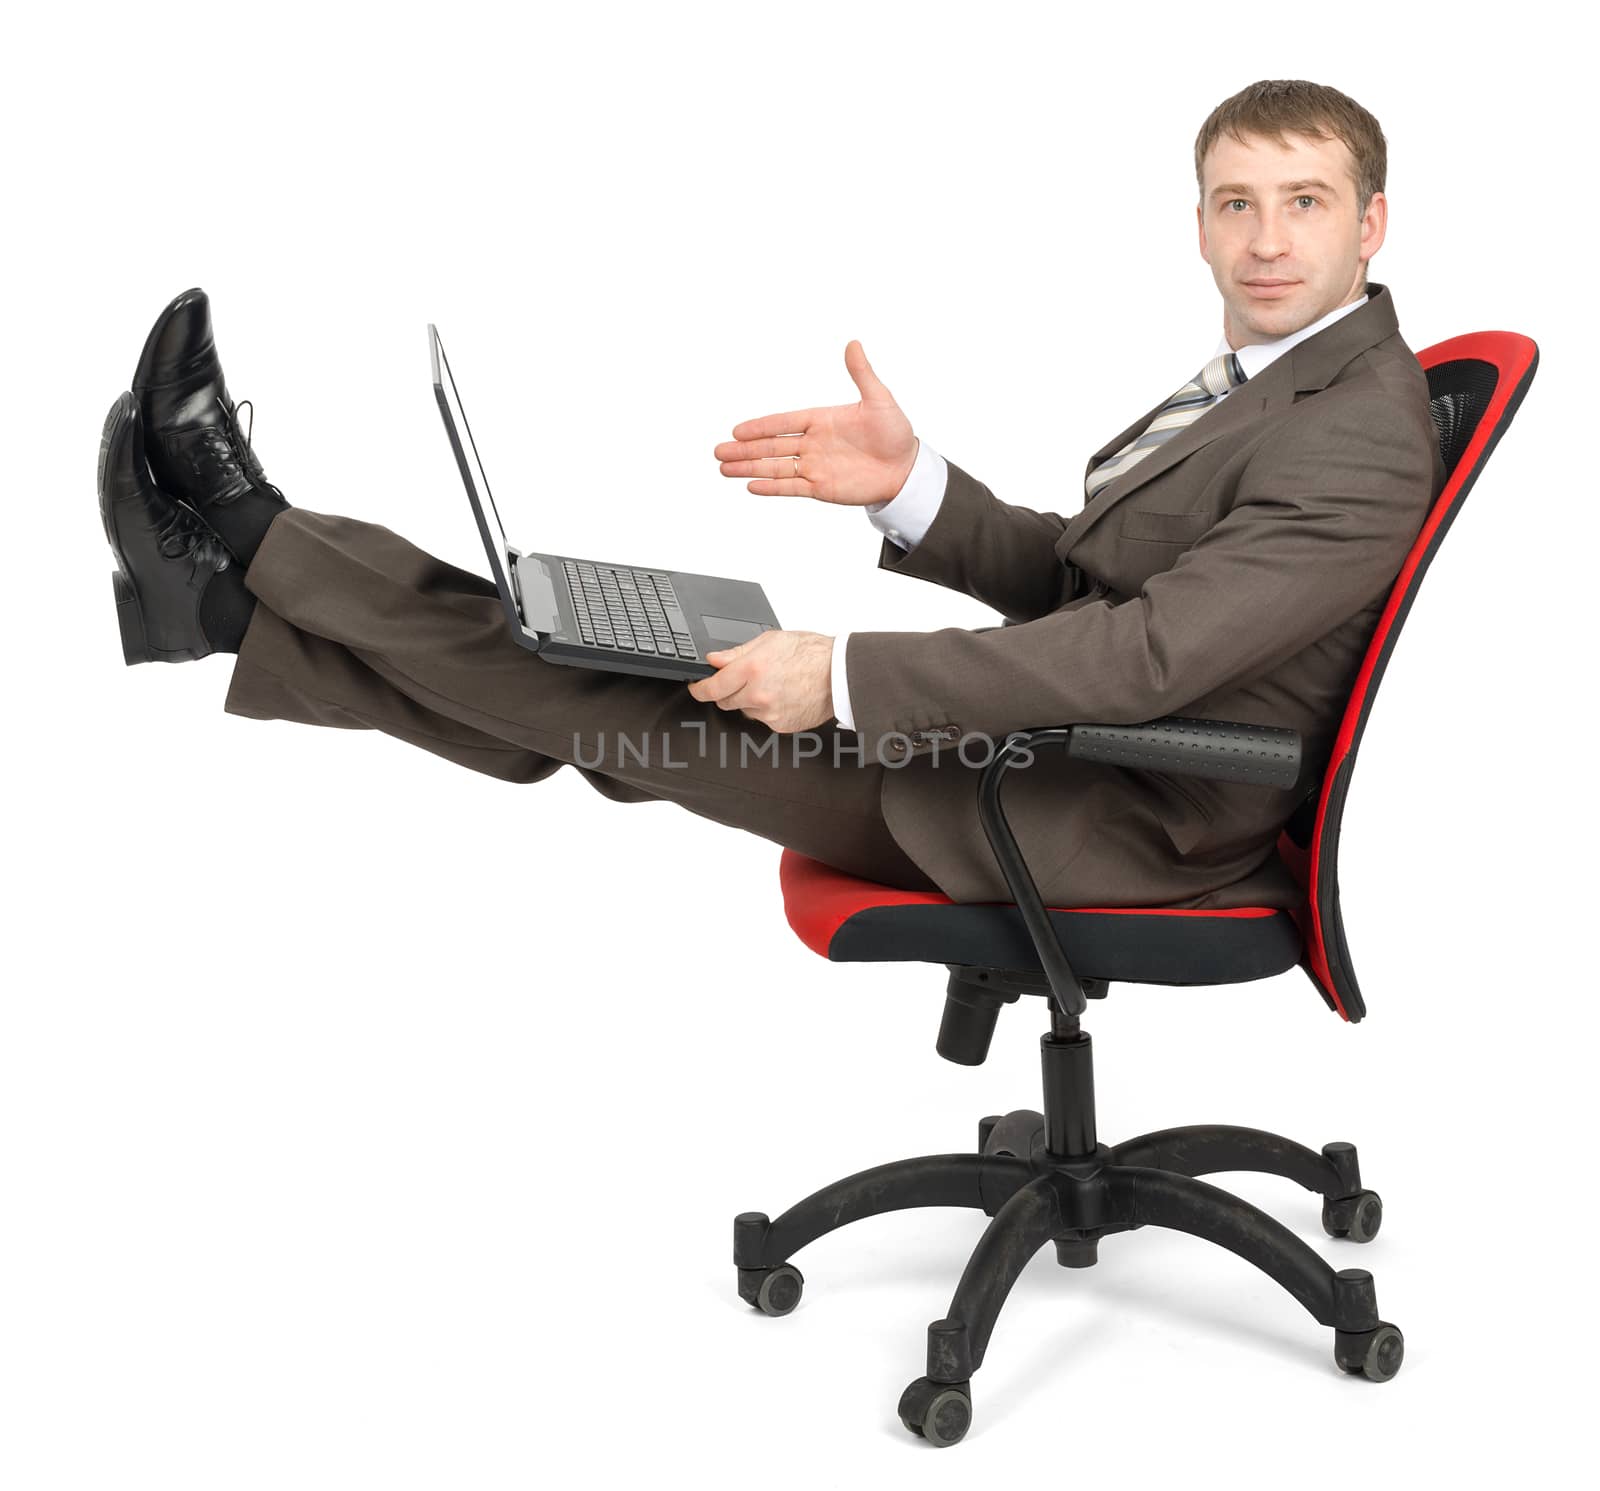 Businessman sitting on chair with laptop and legs up, looking at camera isolated on white background